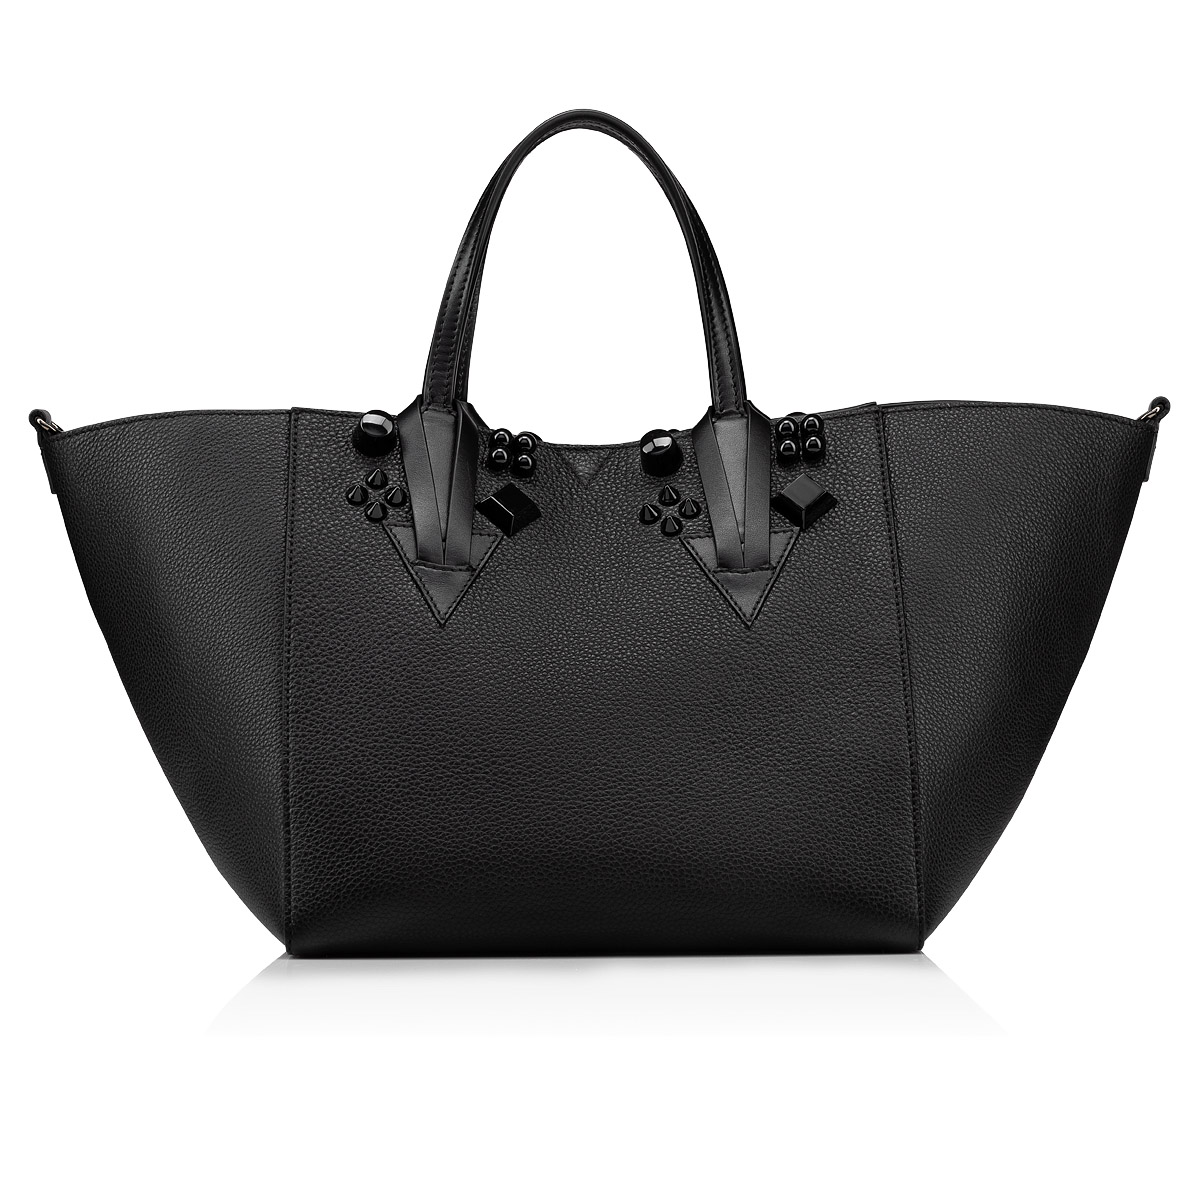 belt 377849 - Cabarock Small Grained Leather Tote